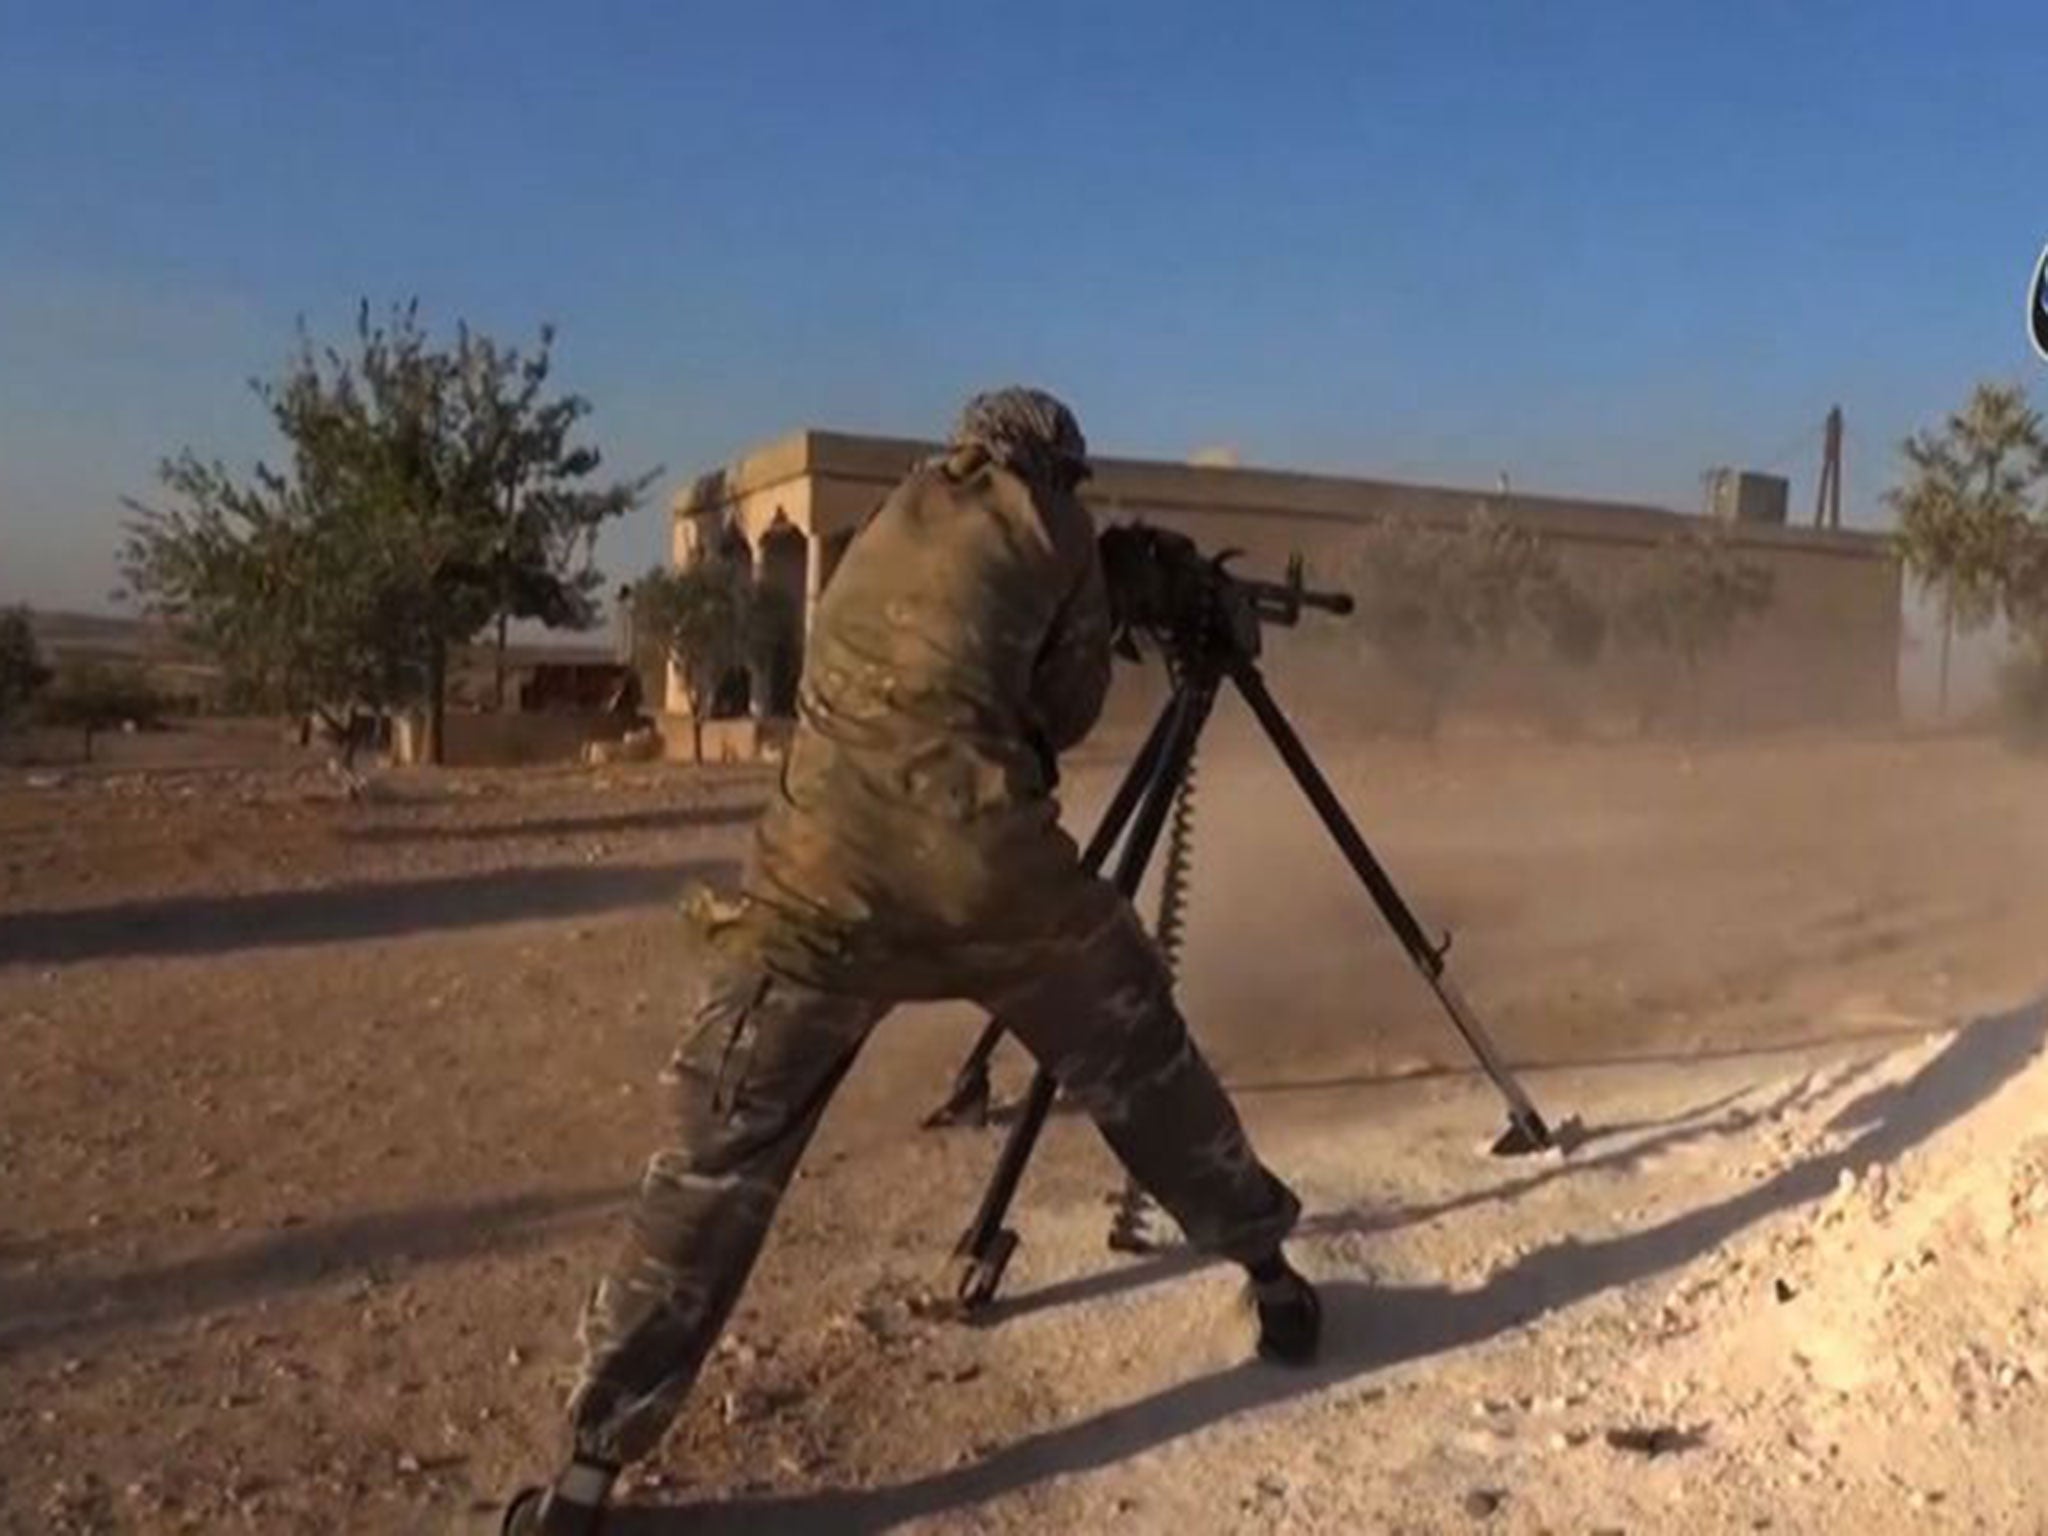 An Isis militant fires a heavy machine gun during fighting near the threatened city of Kobane